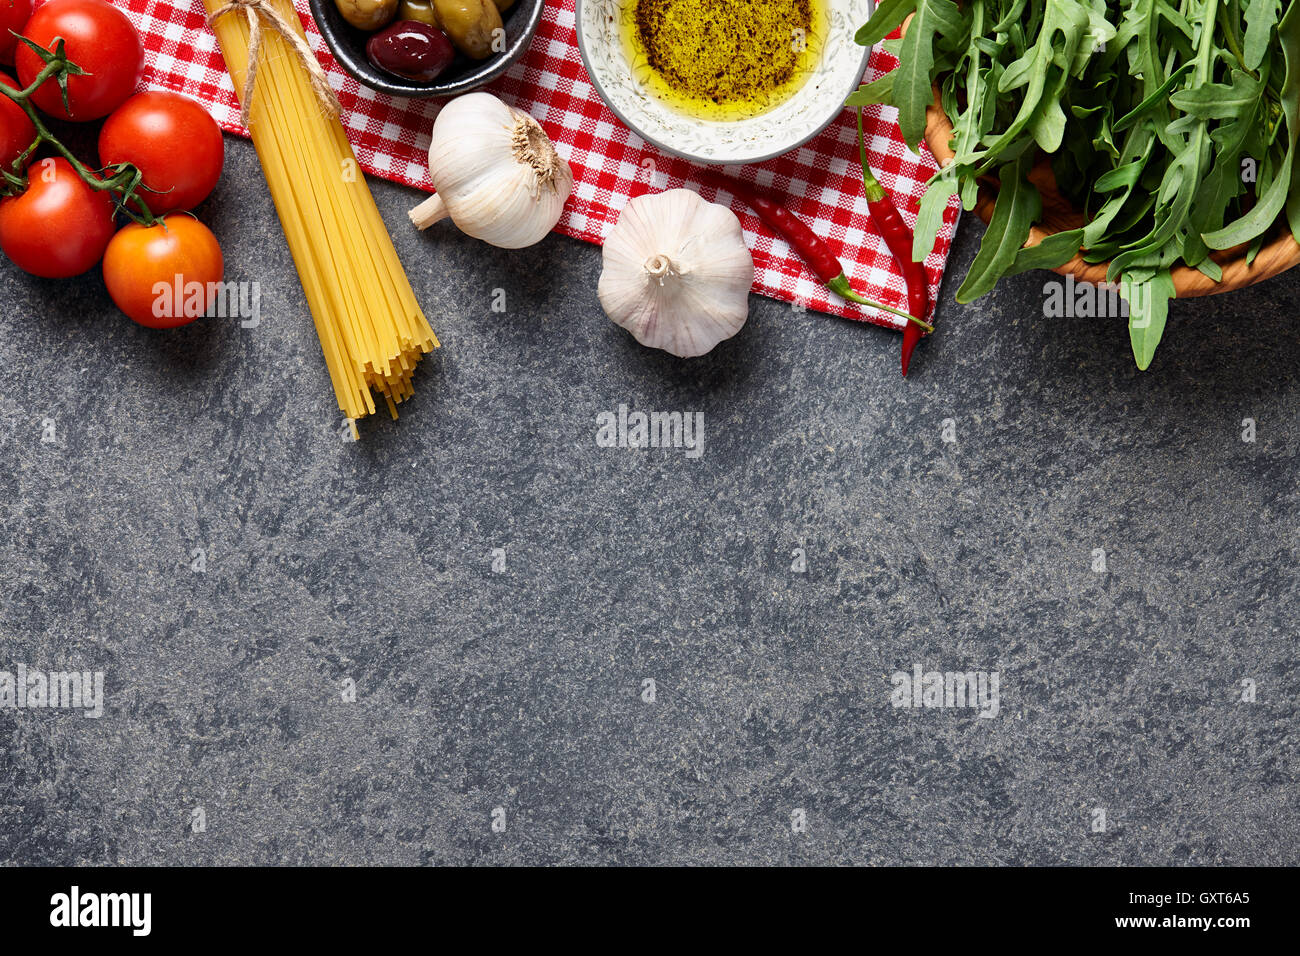 Italian food ingredients background with raw spaghetti, olives, rocket salad, garlic, olive oil and tomatoes. Stock Photo